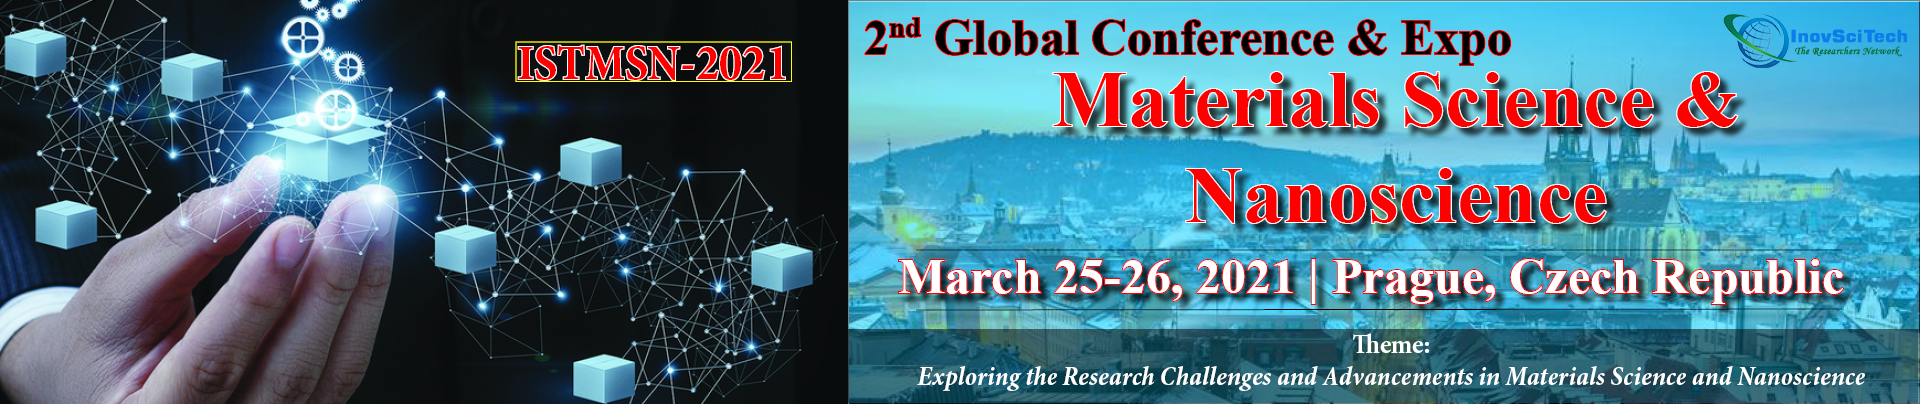 2nd Global Conference & Expo on Materials Science and Nanoscience, Prague, Czech Republic